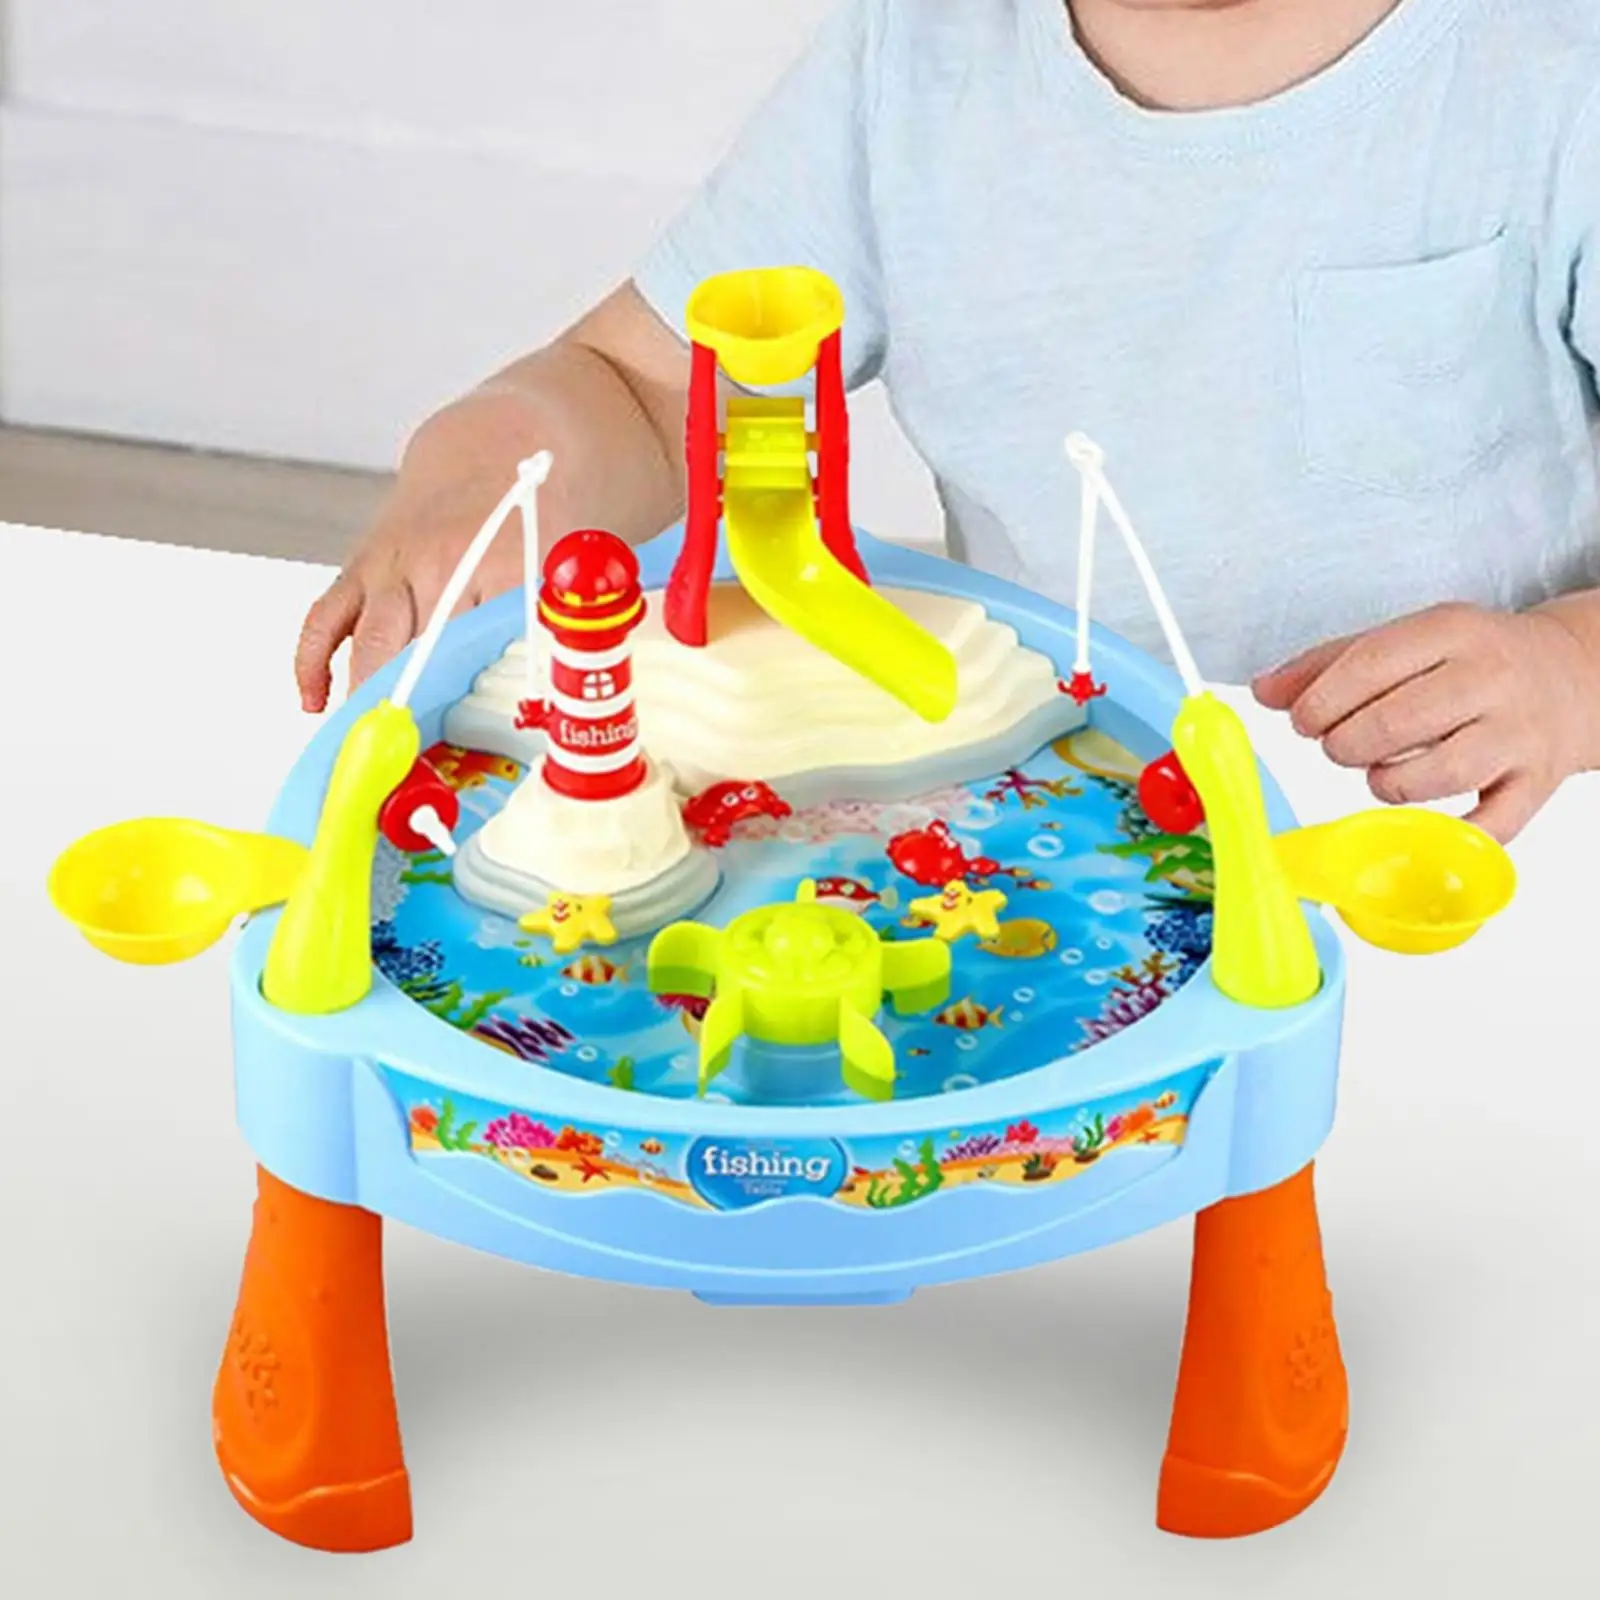 Water Circulating Fishing Game Board Play Set Water Table Toys Small Water Playing Table Outdoor Beach Toys for Activity Beach